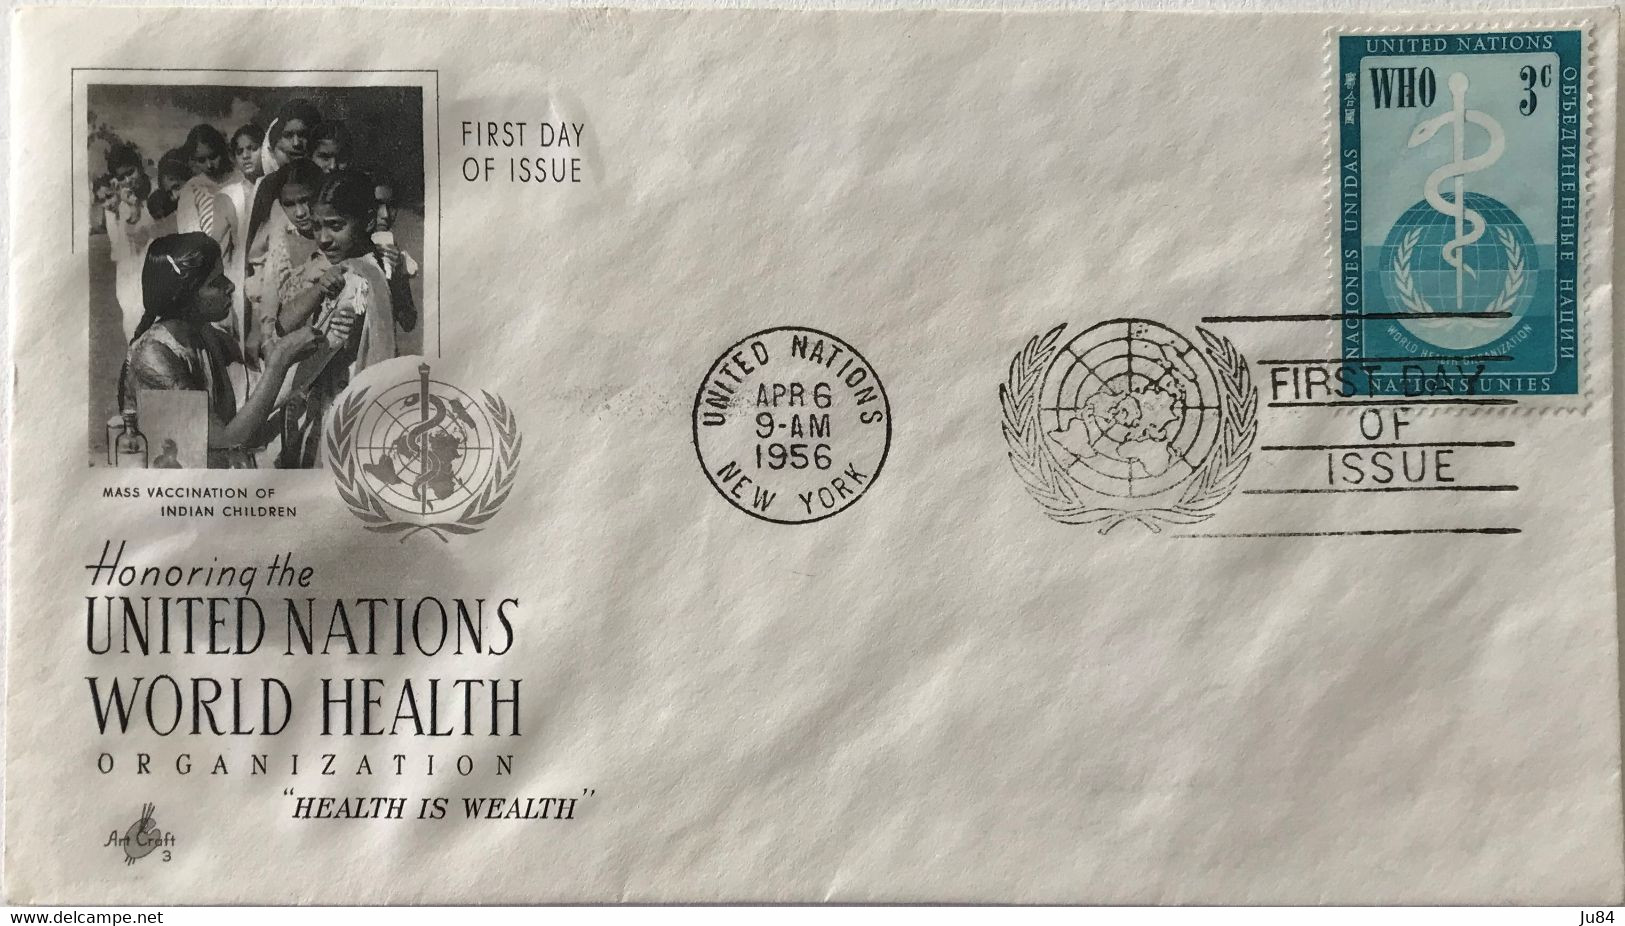 États-Unis - New York - FDC - United Nations - Mass Vaccination Of Indian Children - "Health Is Wealth" - 6 Avril 1956 - 1951-1960